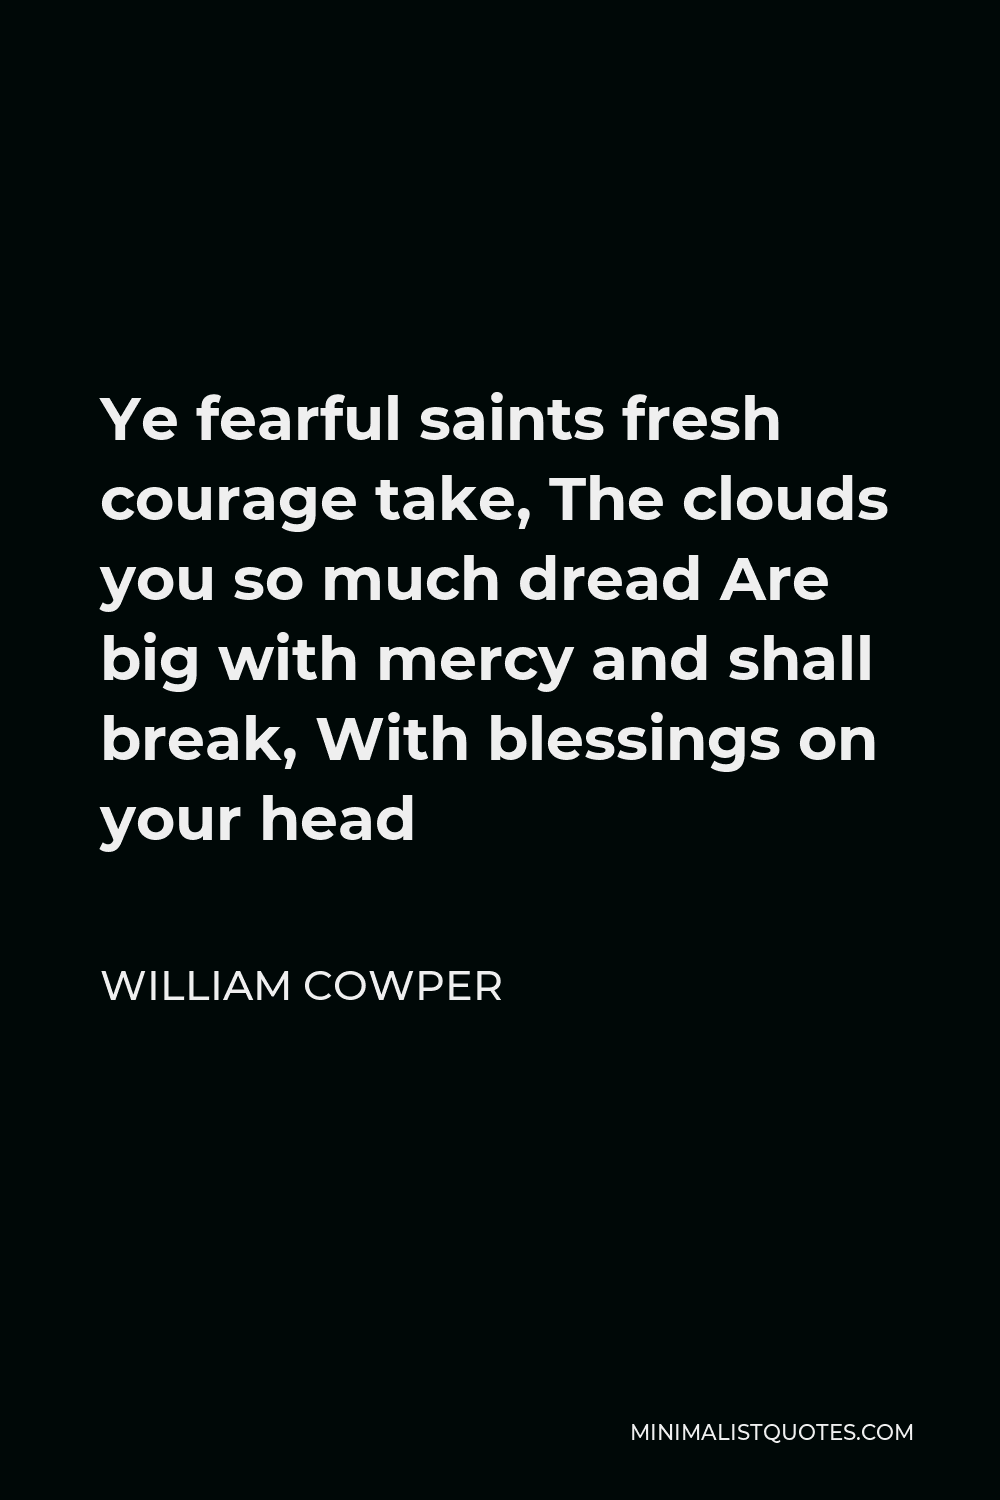 William Cowper Quote - Ye fearful saints fresh courage take, The clouds you so much dread Are big with mercy and shall break, With blessings on your head